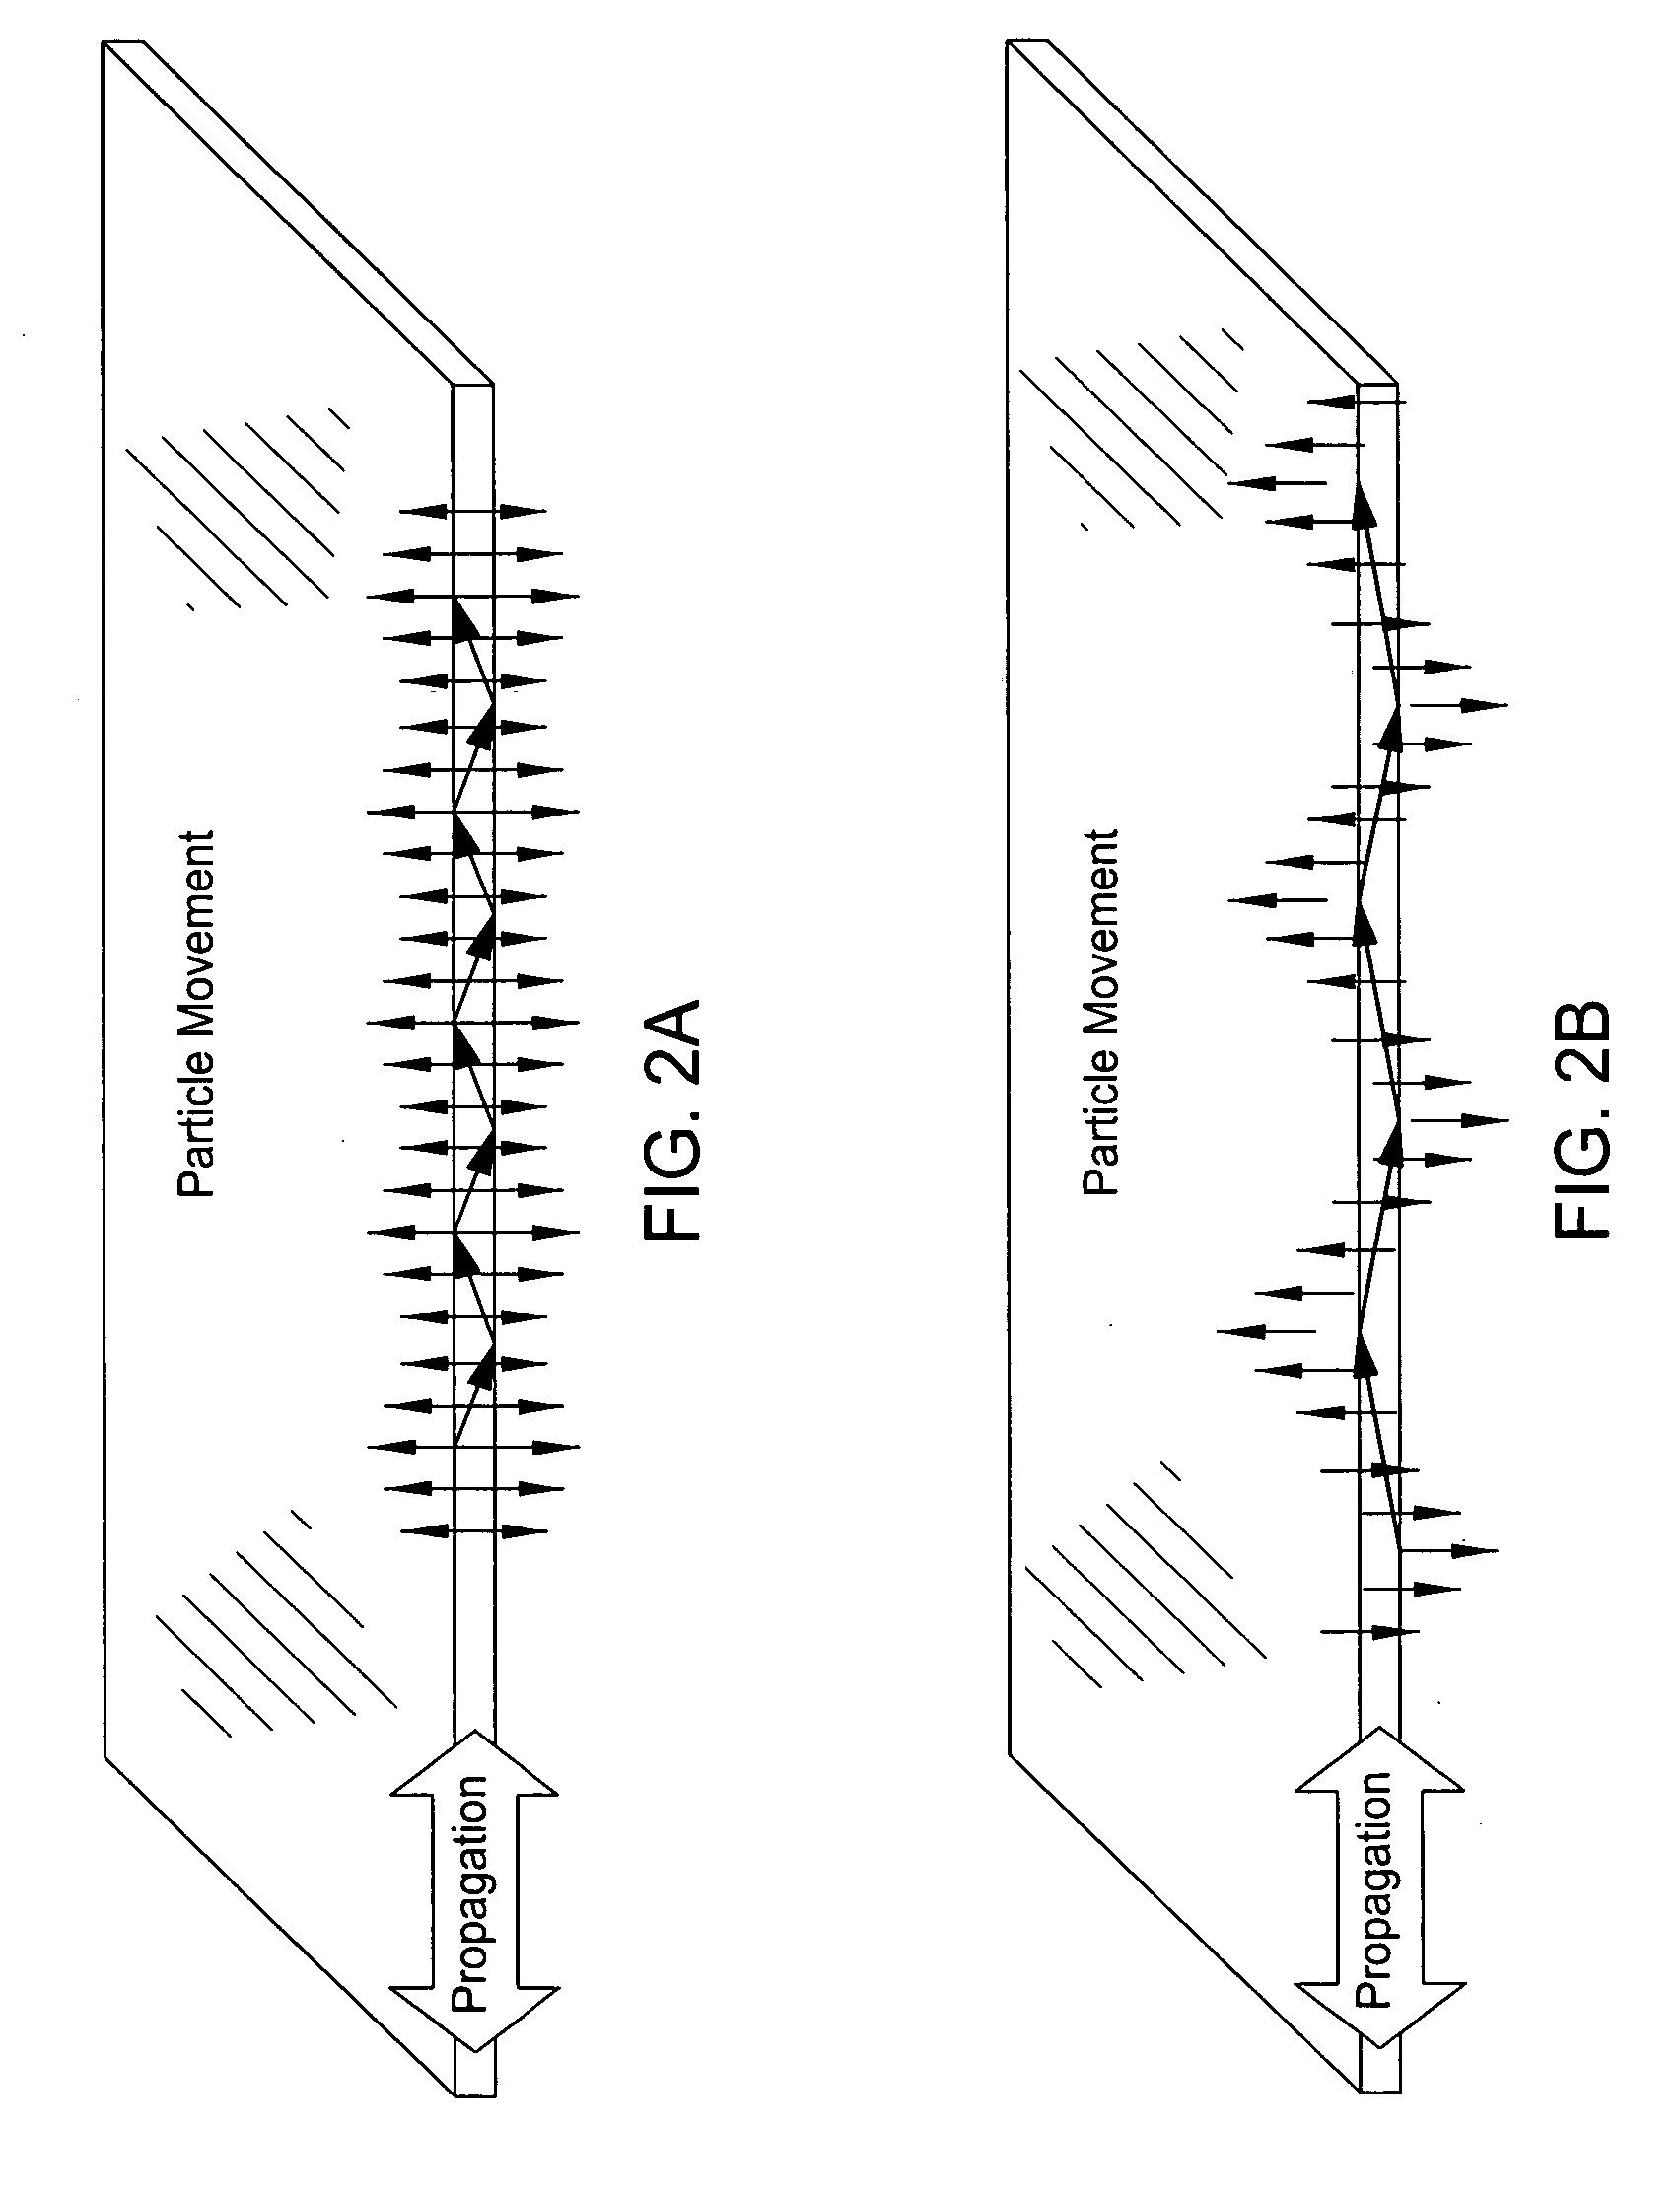 Use of lamb waves in cement bond logging